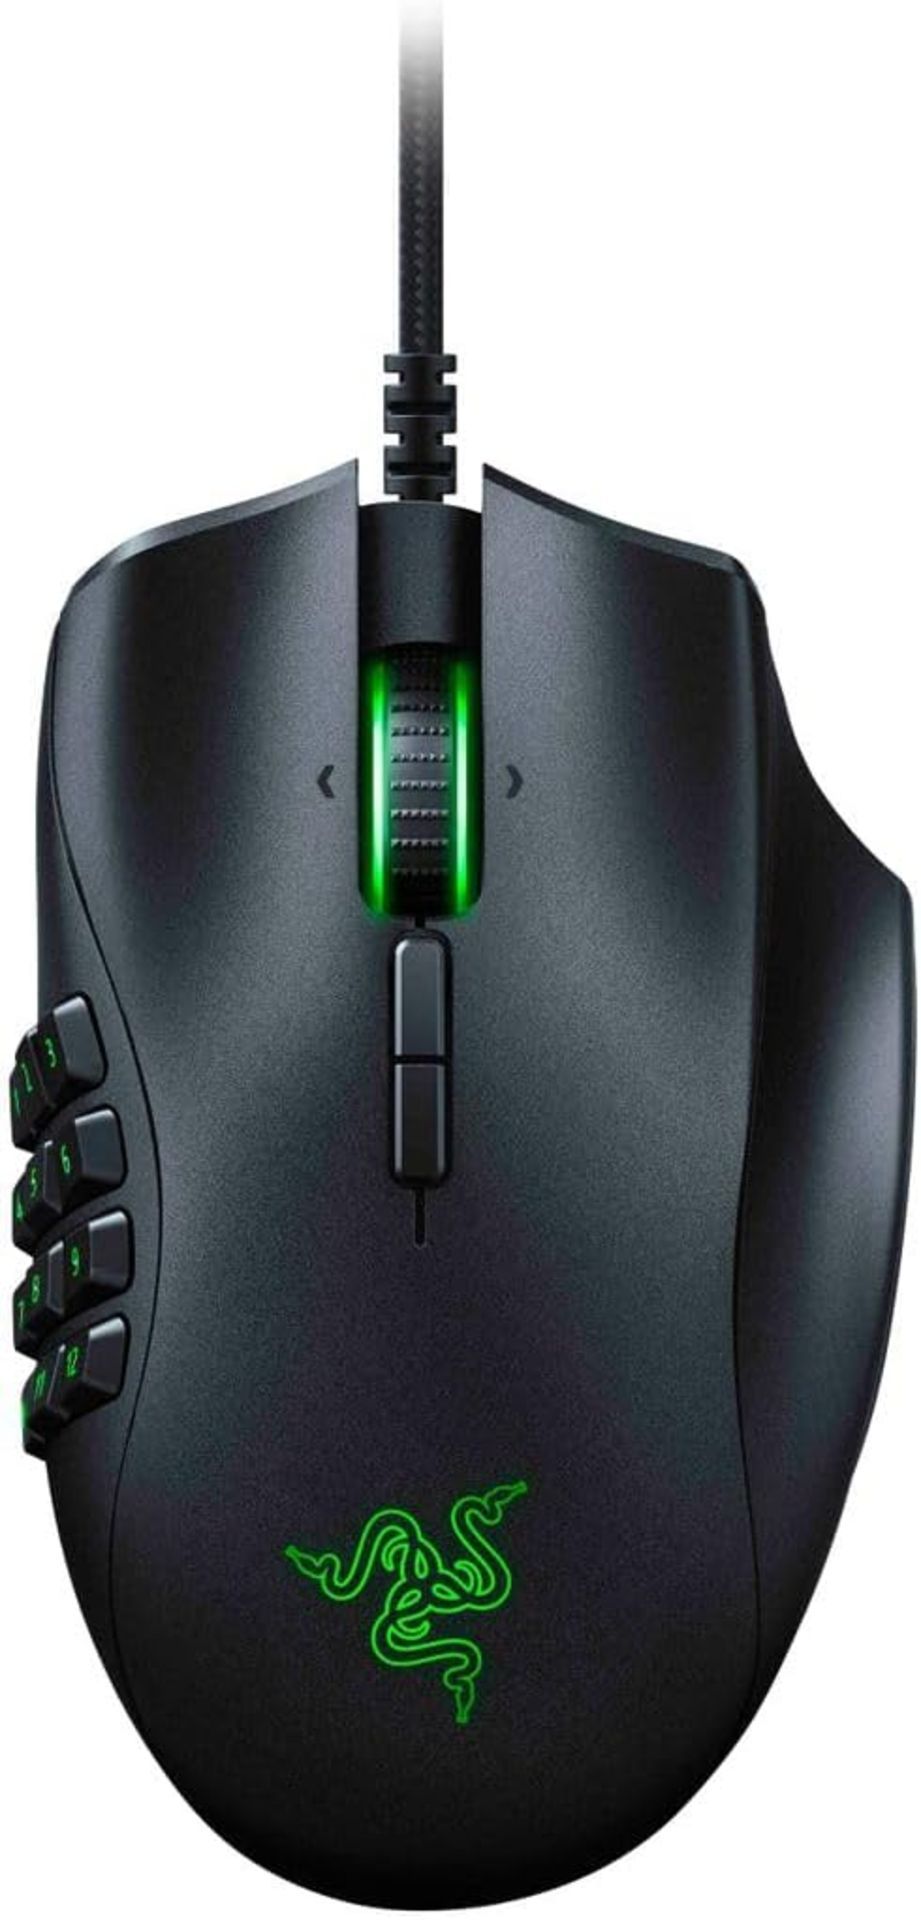 2x BRAND NEW FACTORY SEALED RAZER Naga Trinity MOBA/MMO Wired Gaming Mouse. RRP £59.99 EACH. - Image 2 of 5